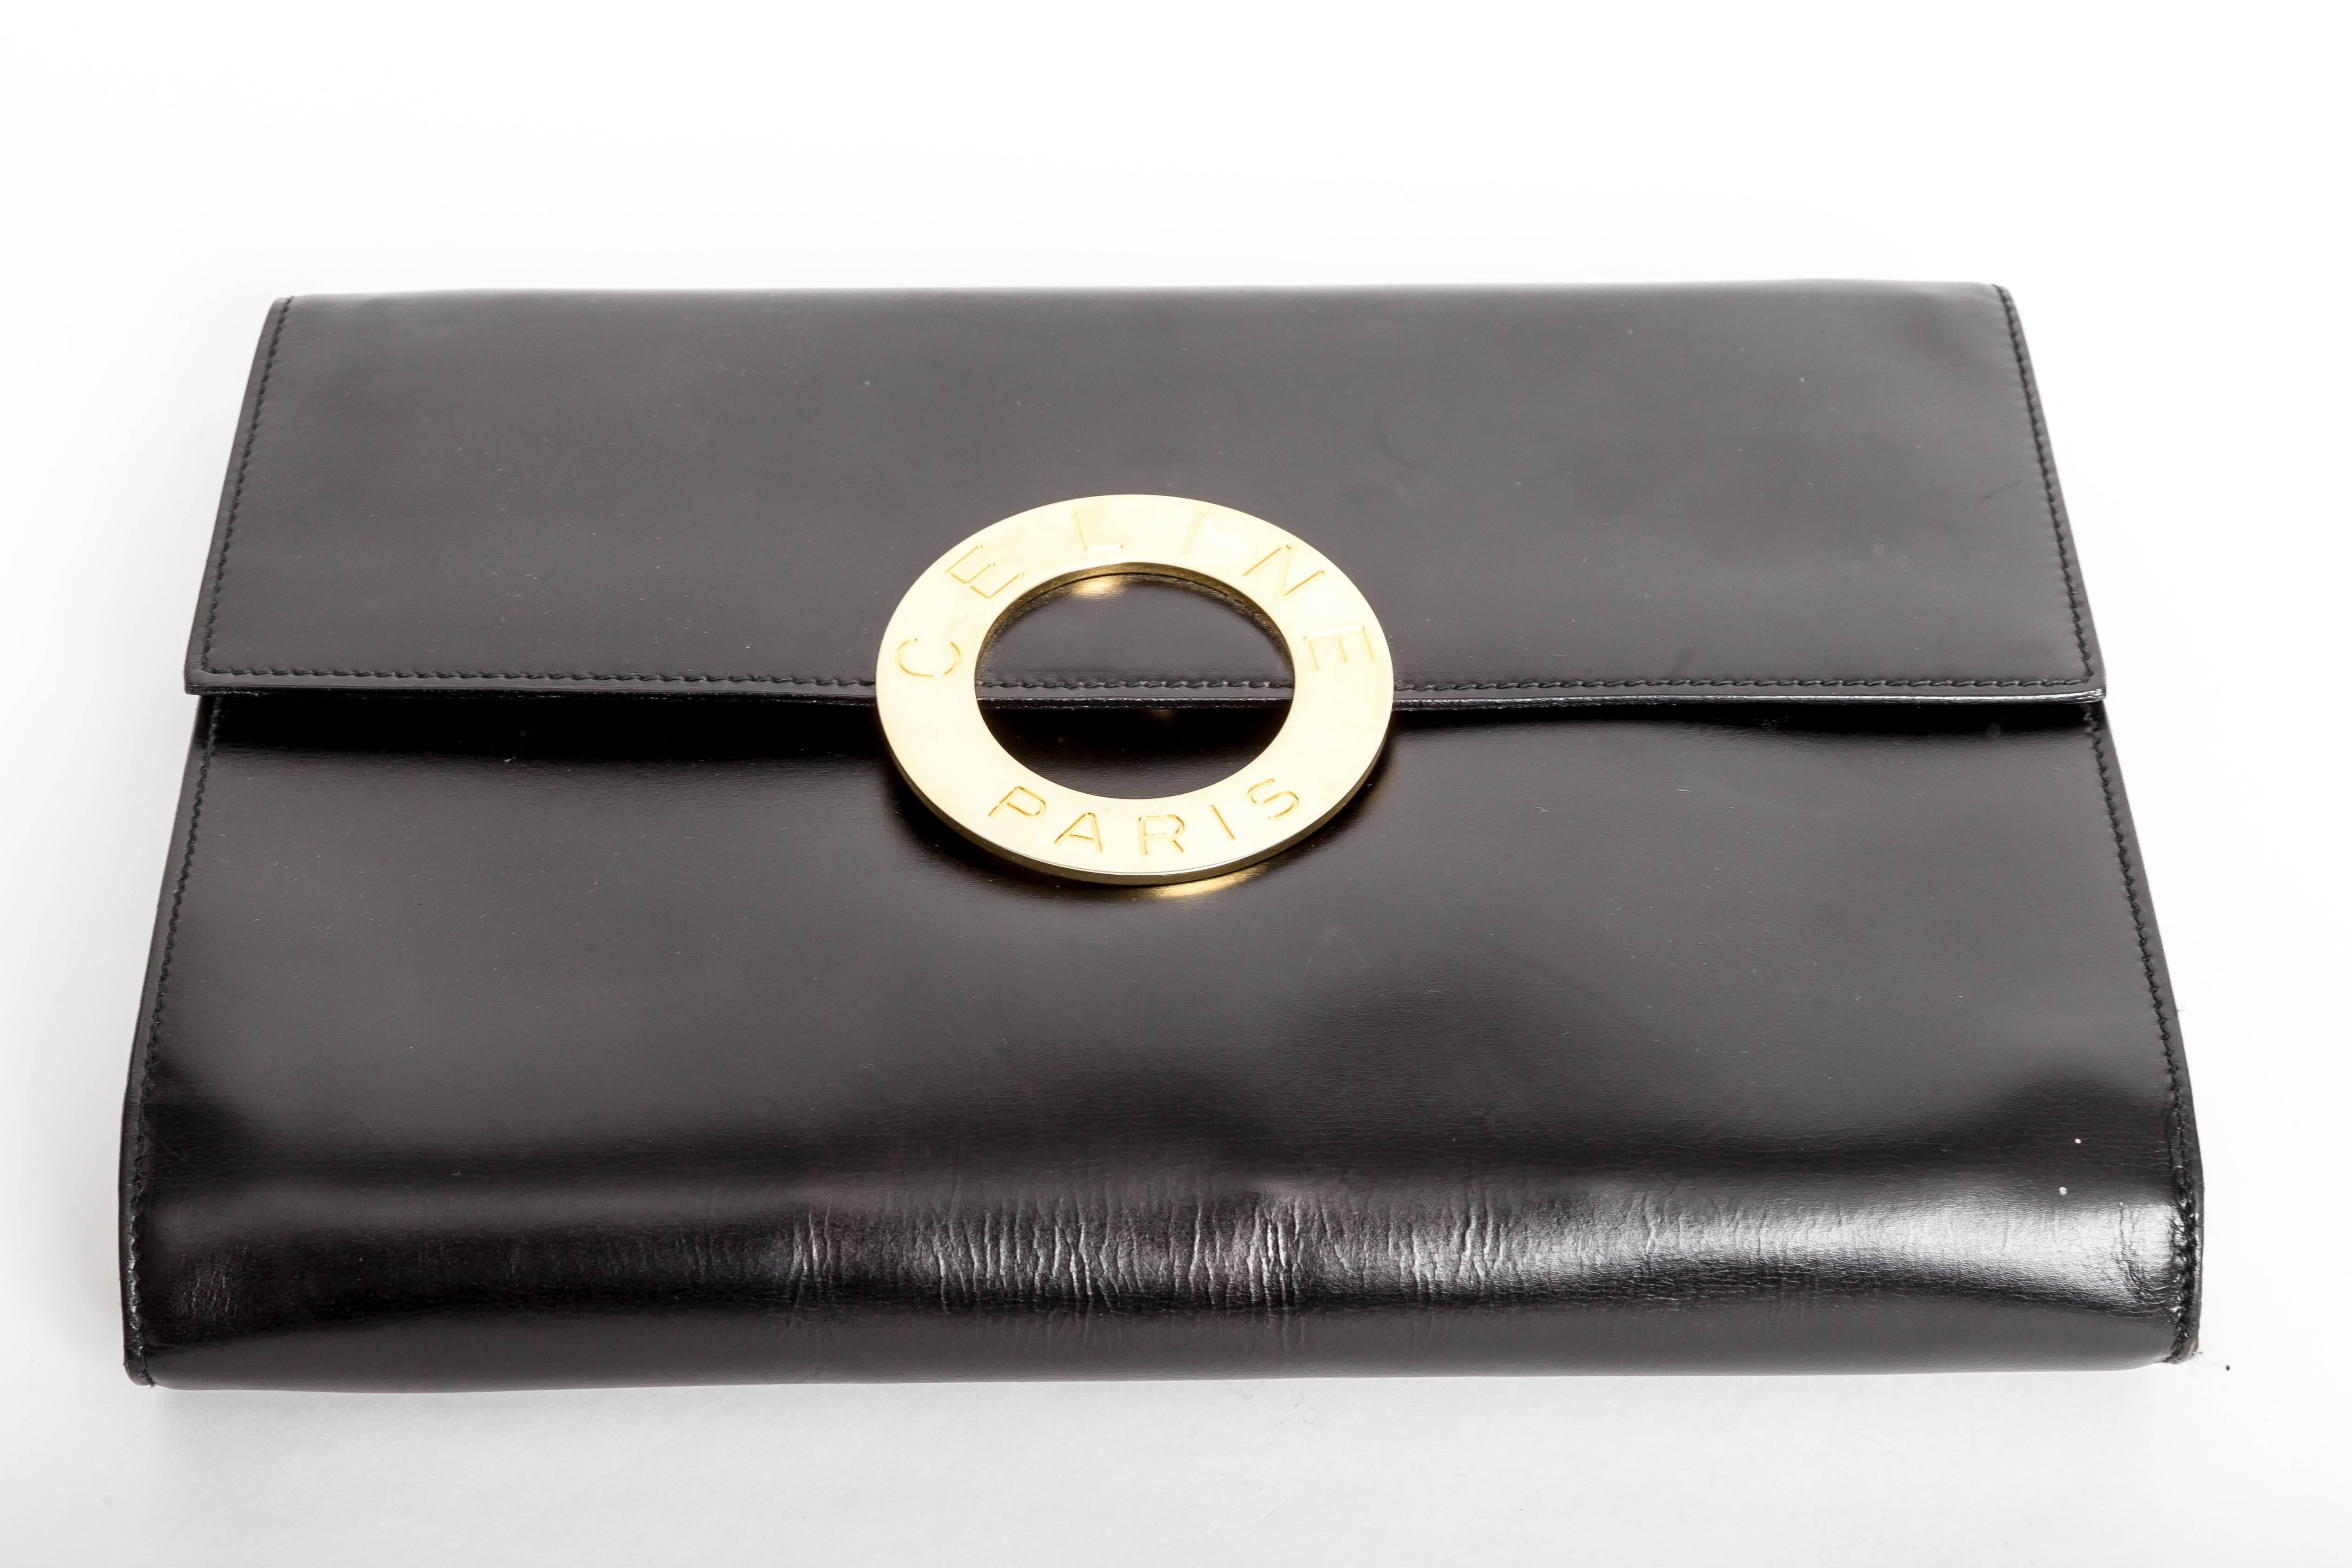 Incredibly chic black leather Celine clutch with detachable shoulder strap.
Lined in red Leather.
Fabulous Gold Celine Clasp.
The leather shoulder strap has caused some marks to the interior of the bag.
A few indentations to the exterior of the